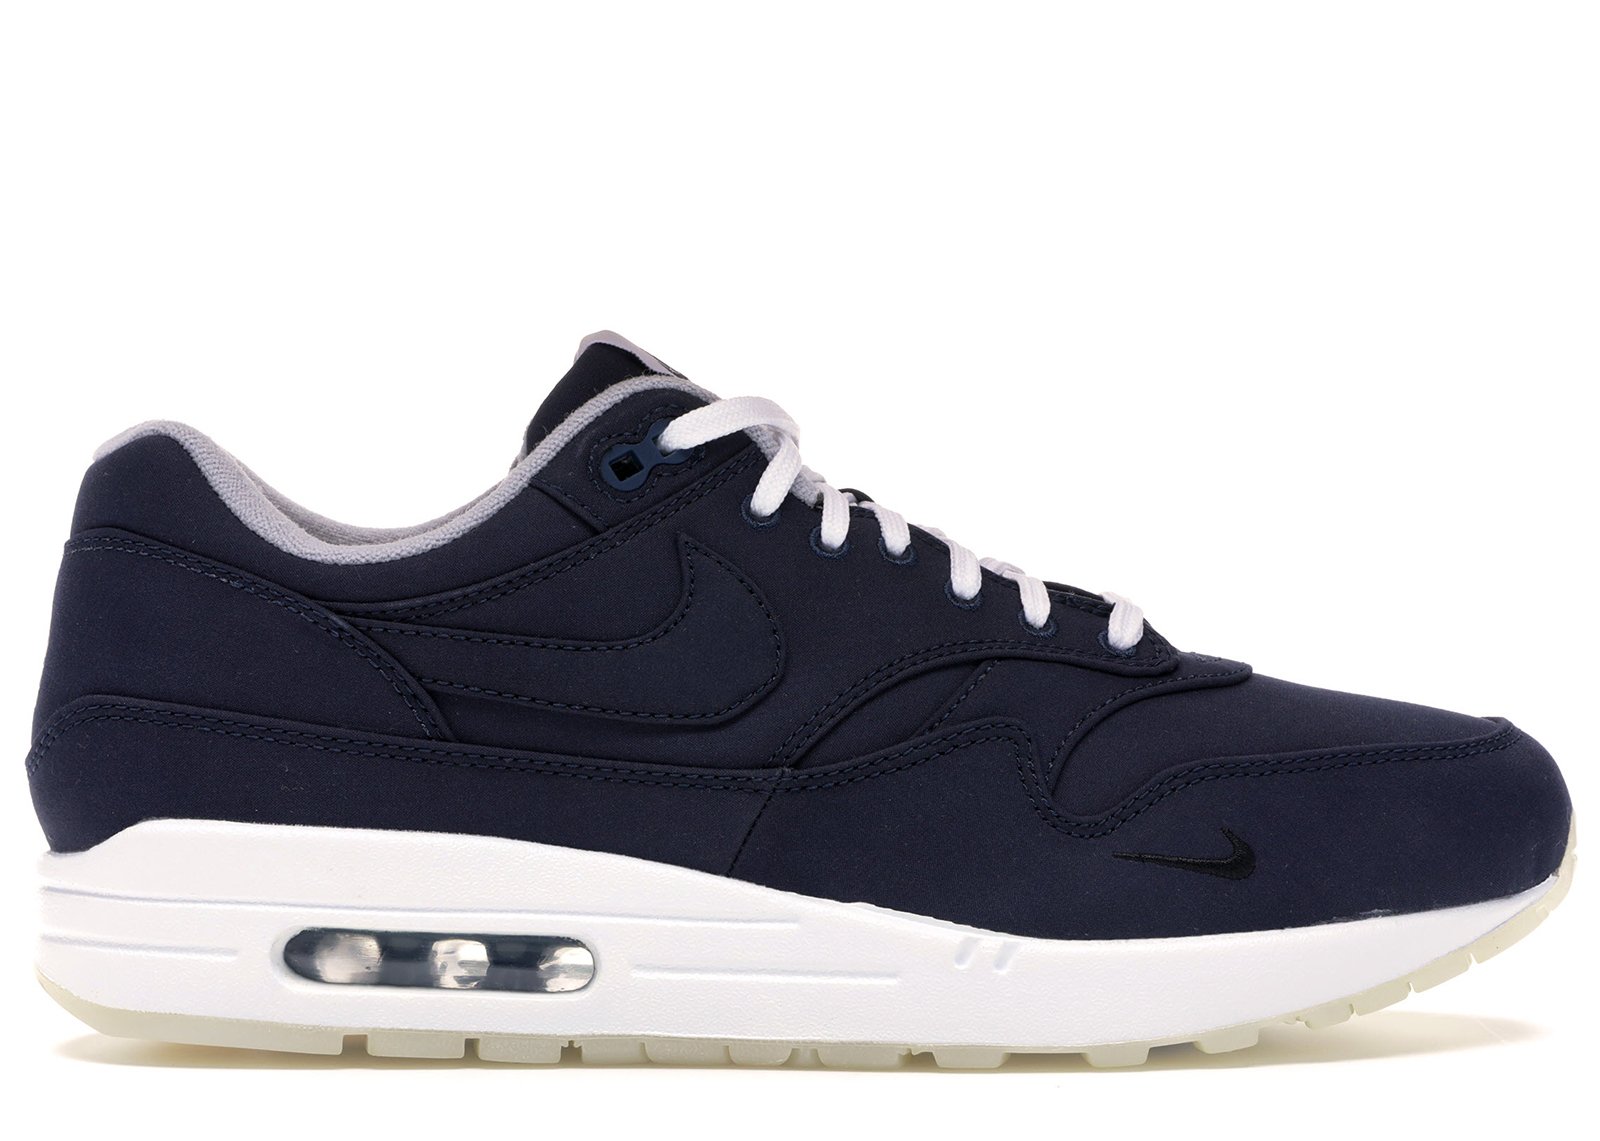 sneakers Nike Air Max 1 Dover Street Market Ventile (Brave Blue)